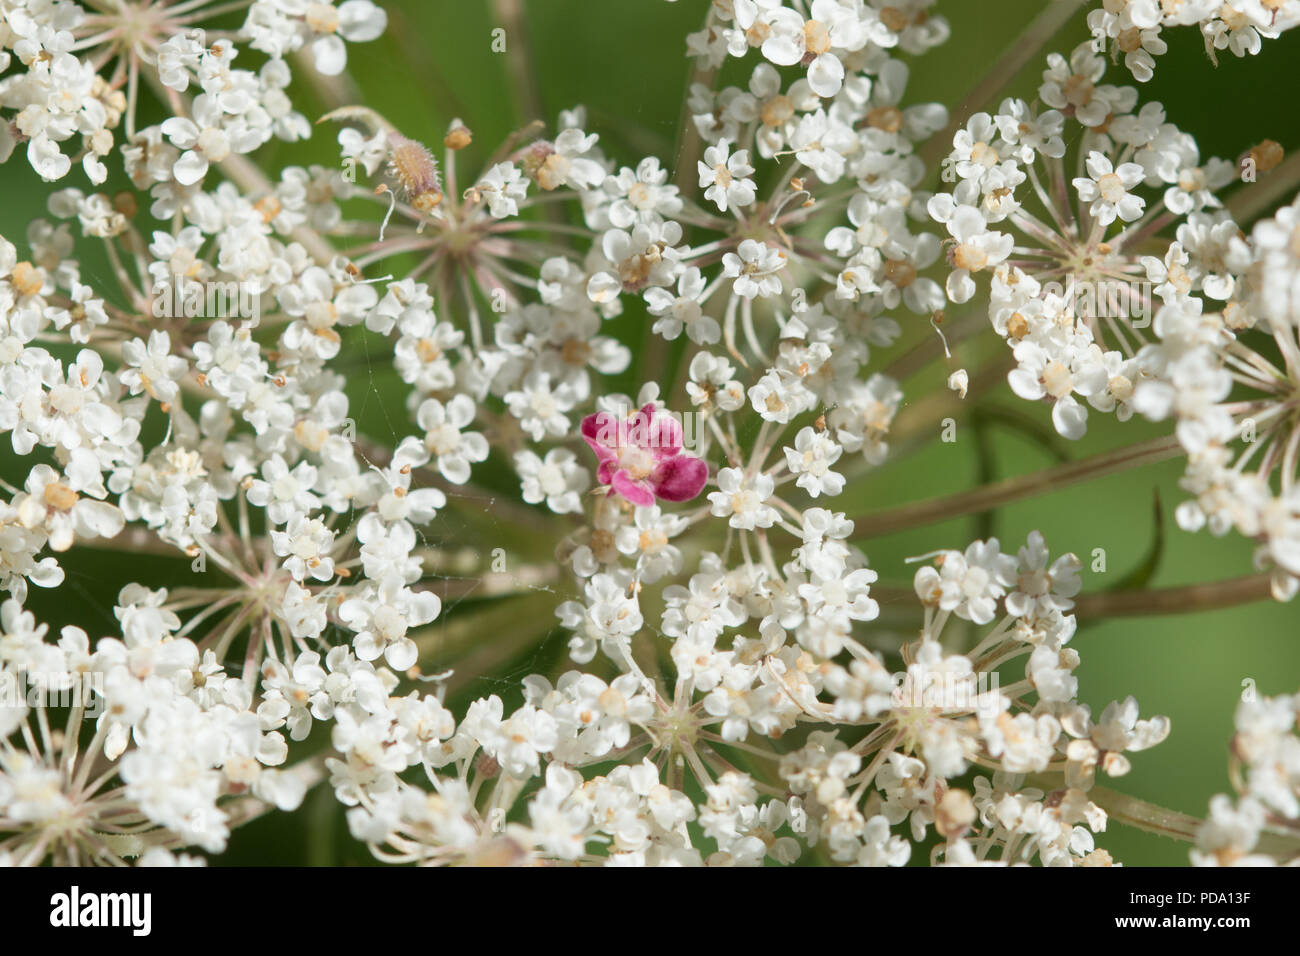 Wild carrot flower (Daucus carota) showing the red/pink flower in the centre of the umbel Stock Photo